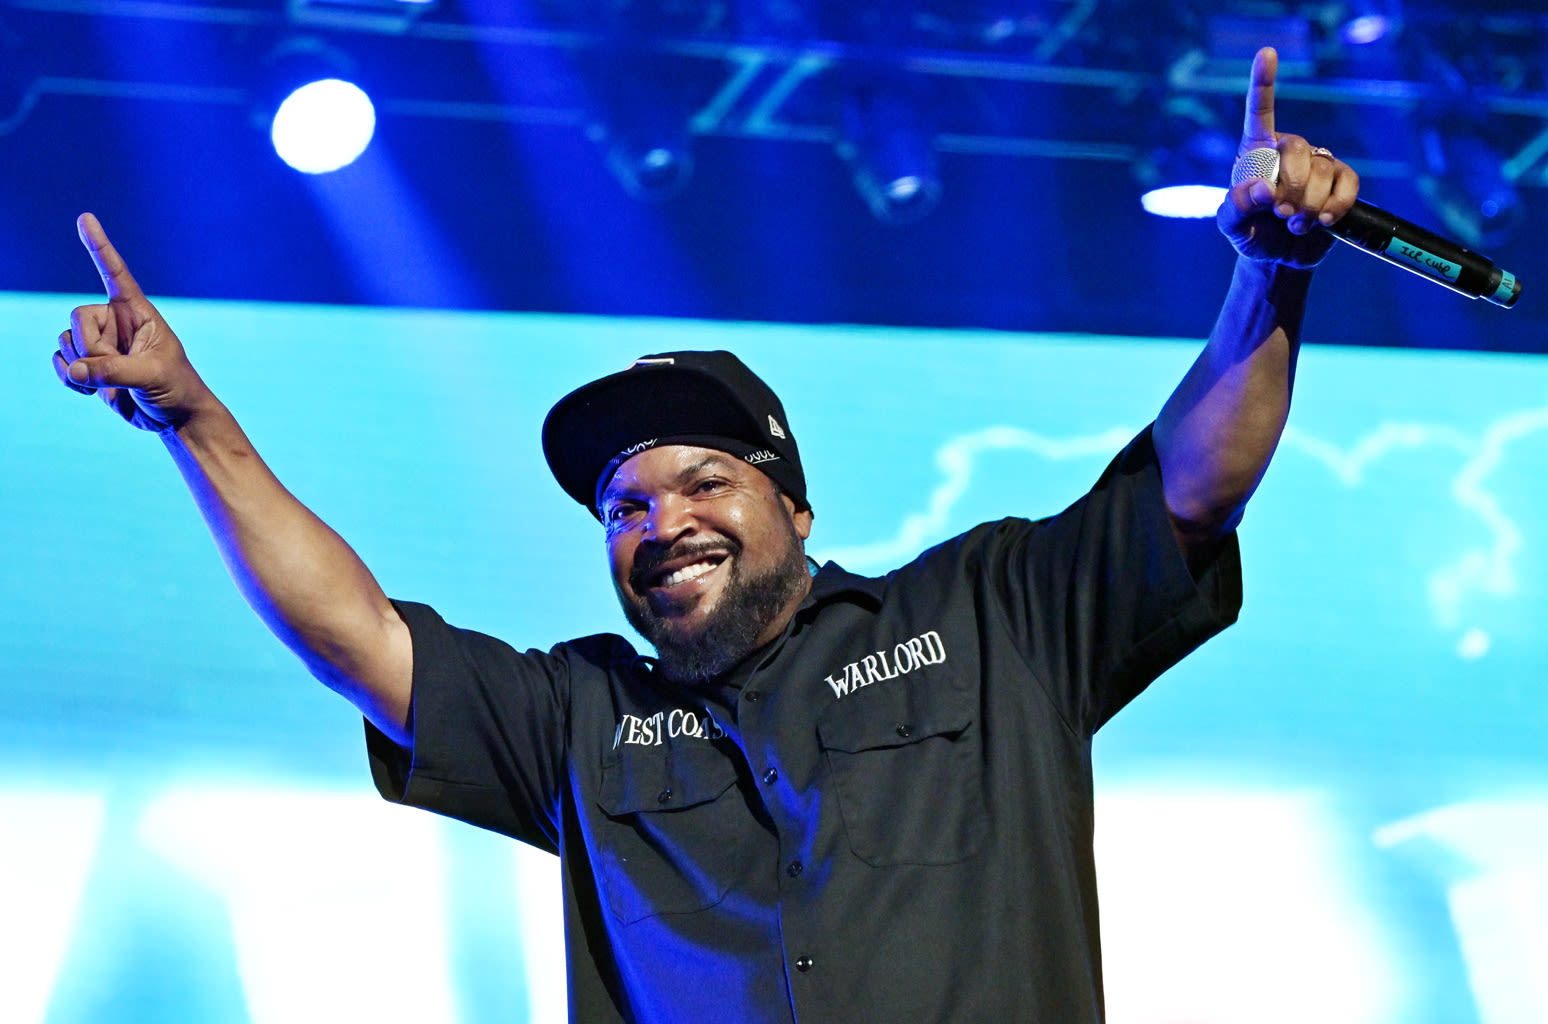 Here’s Why Ice Cube Says His ‘No Vaseline’ Is the Best Diss Track in Hip-Hop History